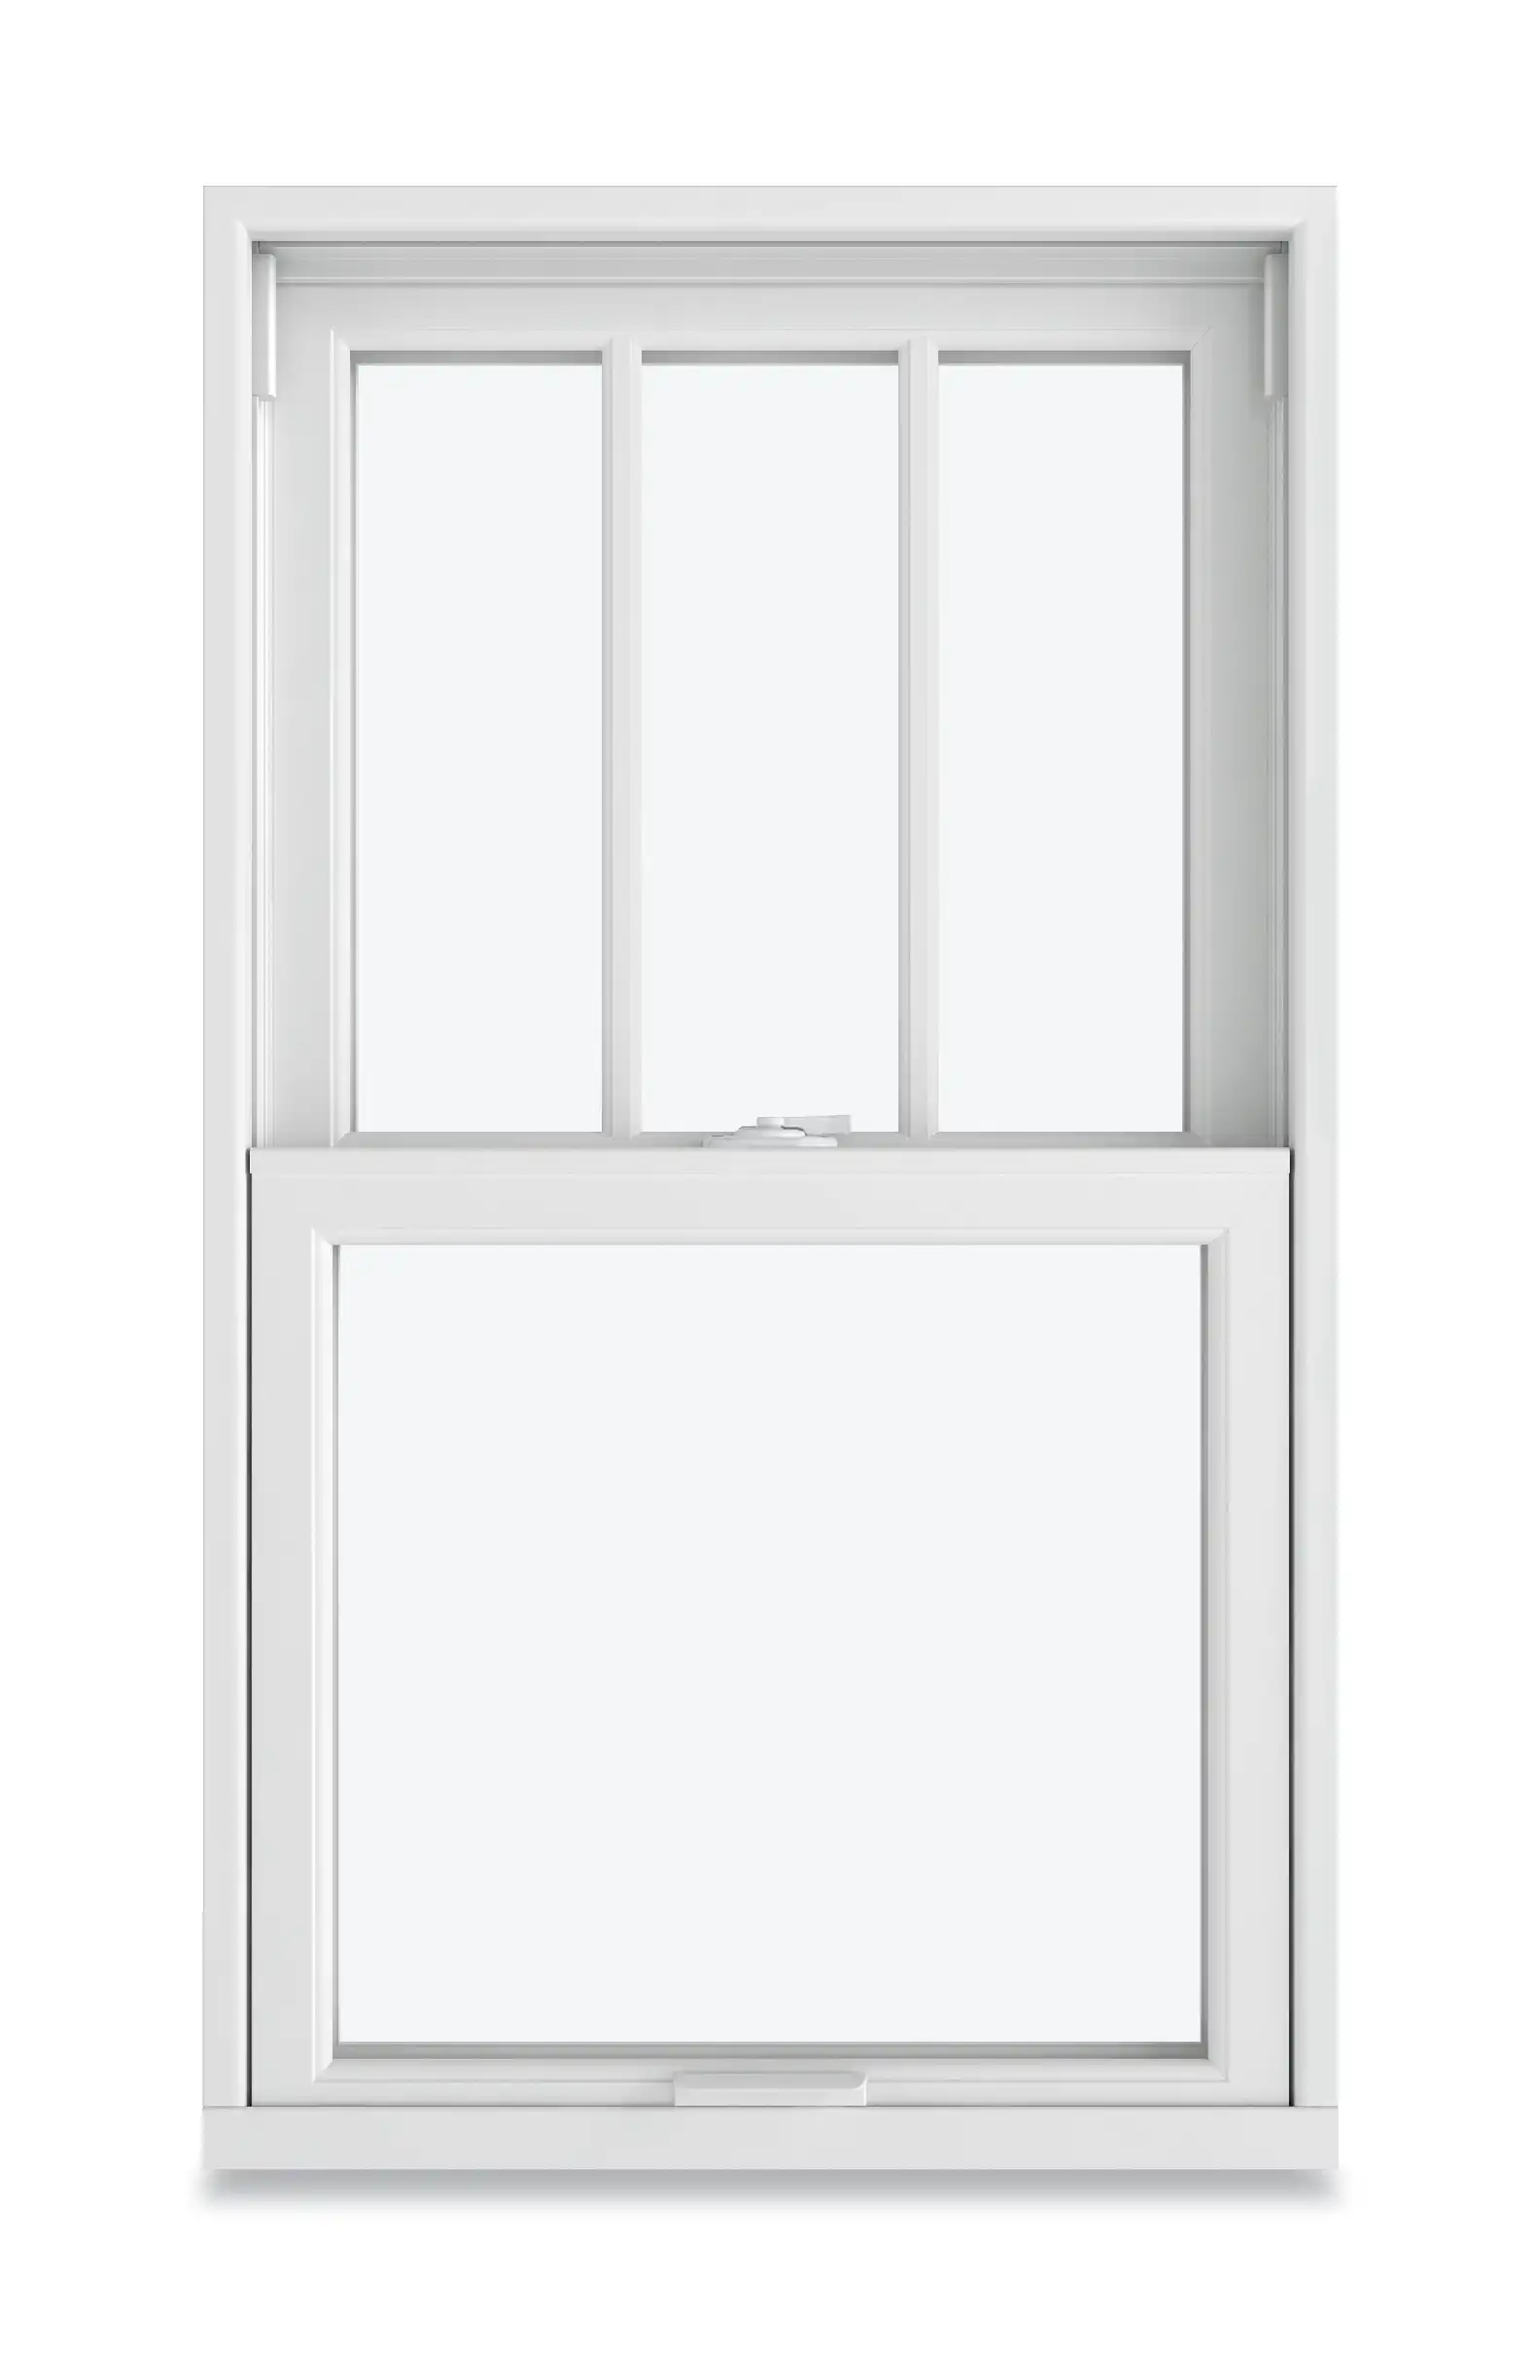 Image of a Marvin Replacement Double Hung window with Rectangular Divided Lites.